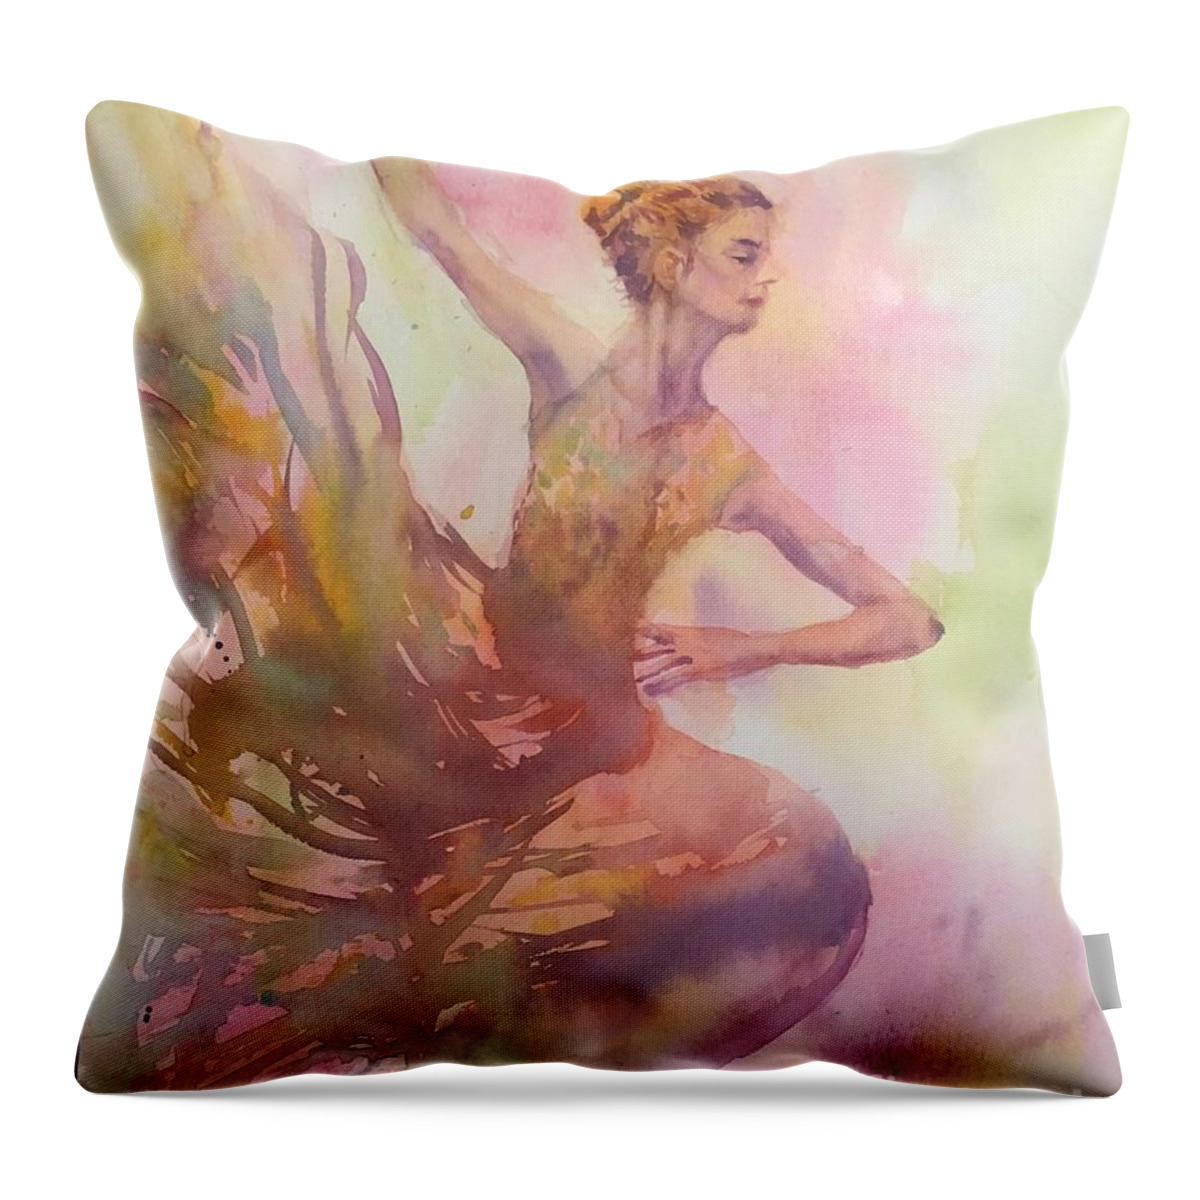 1052021 Throw Pillow featuring the painting 1052021 by Han in Huang wong